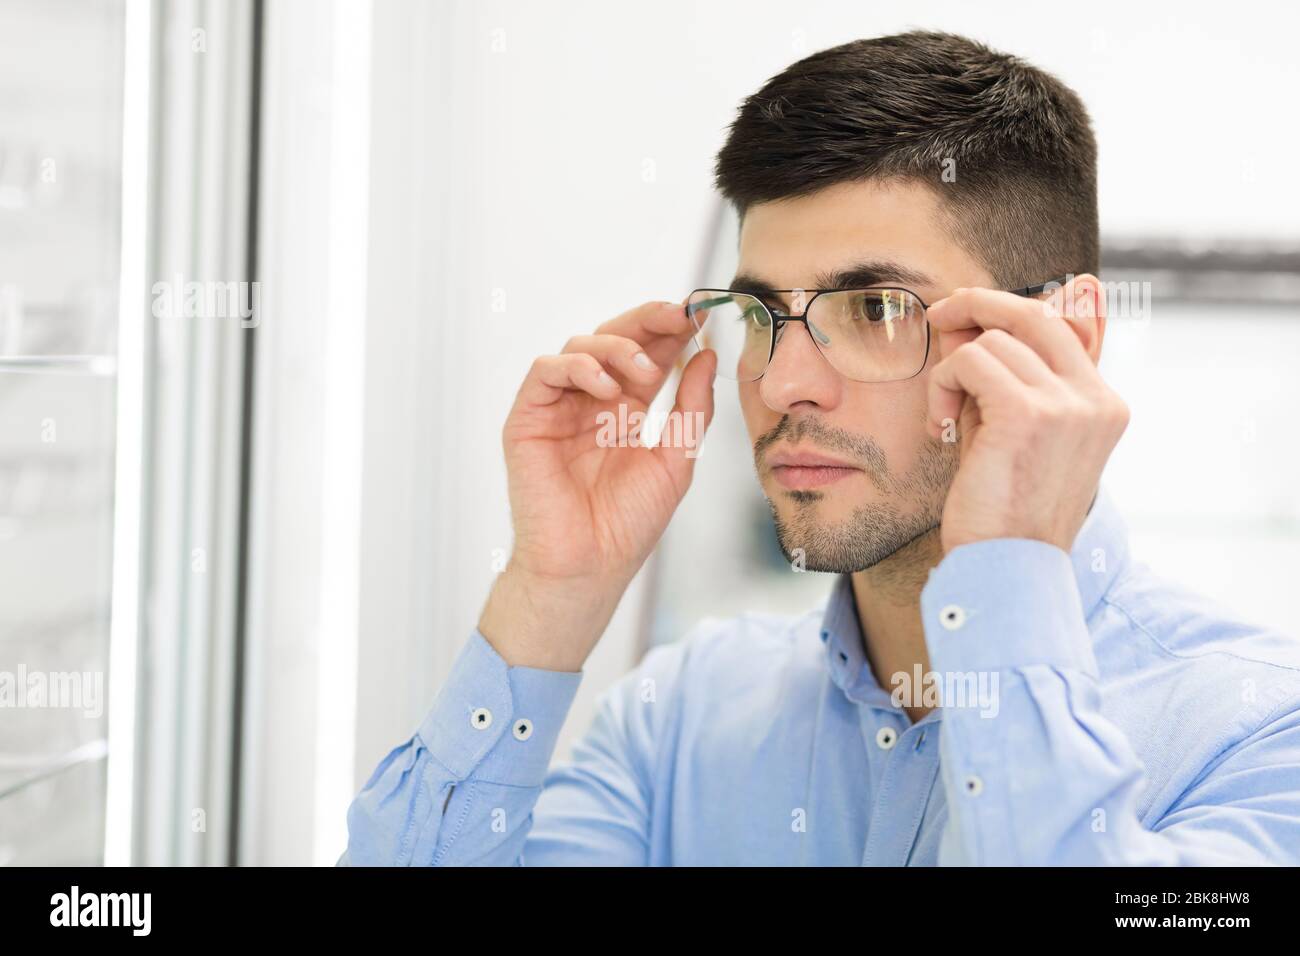 Portrait of handsome young guy wearing spectacles Stock Photo - Alamy